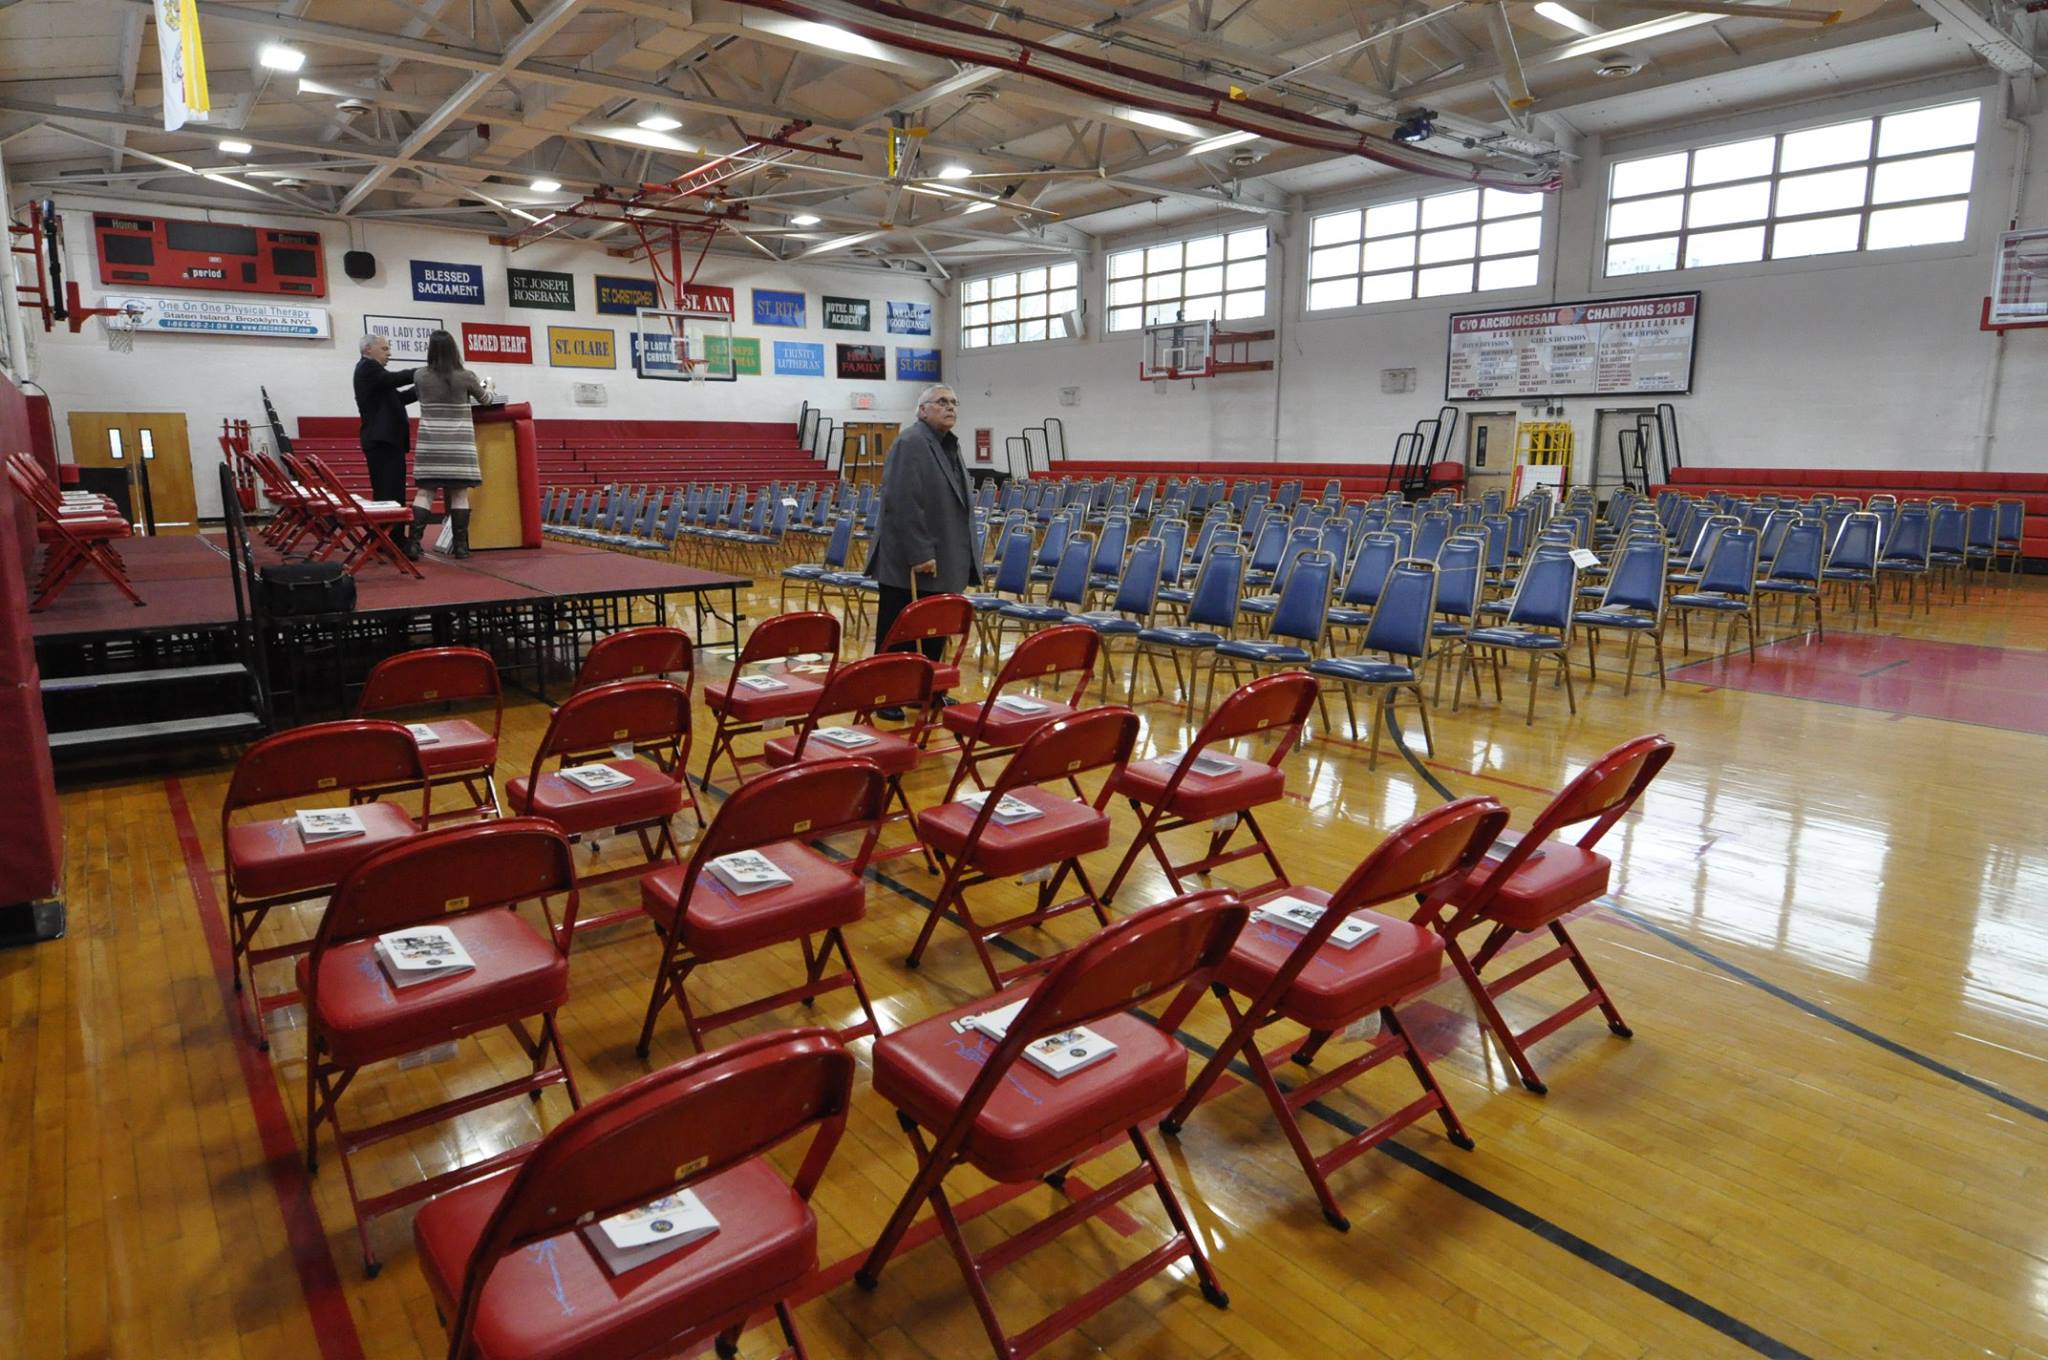 Setting up the gymnasium at Mount Loretto in Staten Island for the Staten Island Sports Hall of Fame 2019 Induction Ceremony